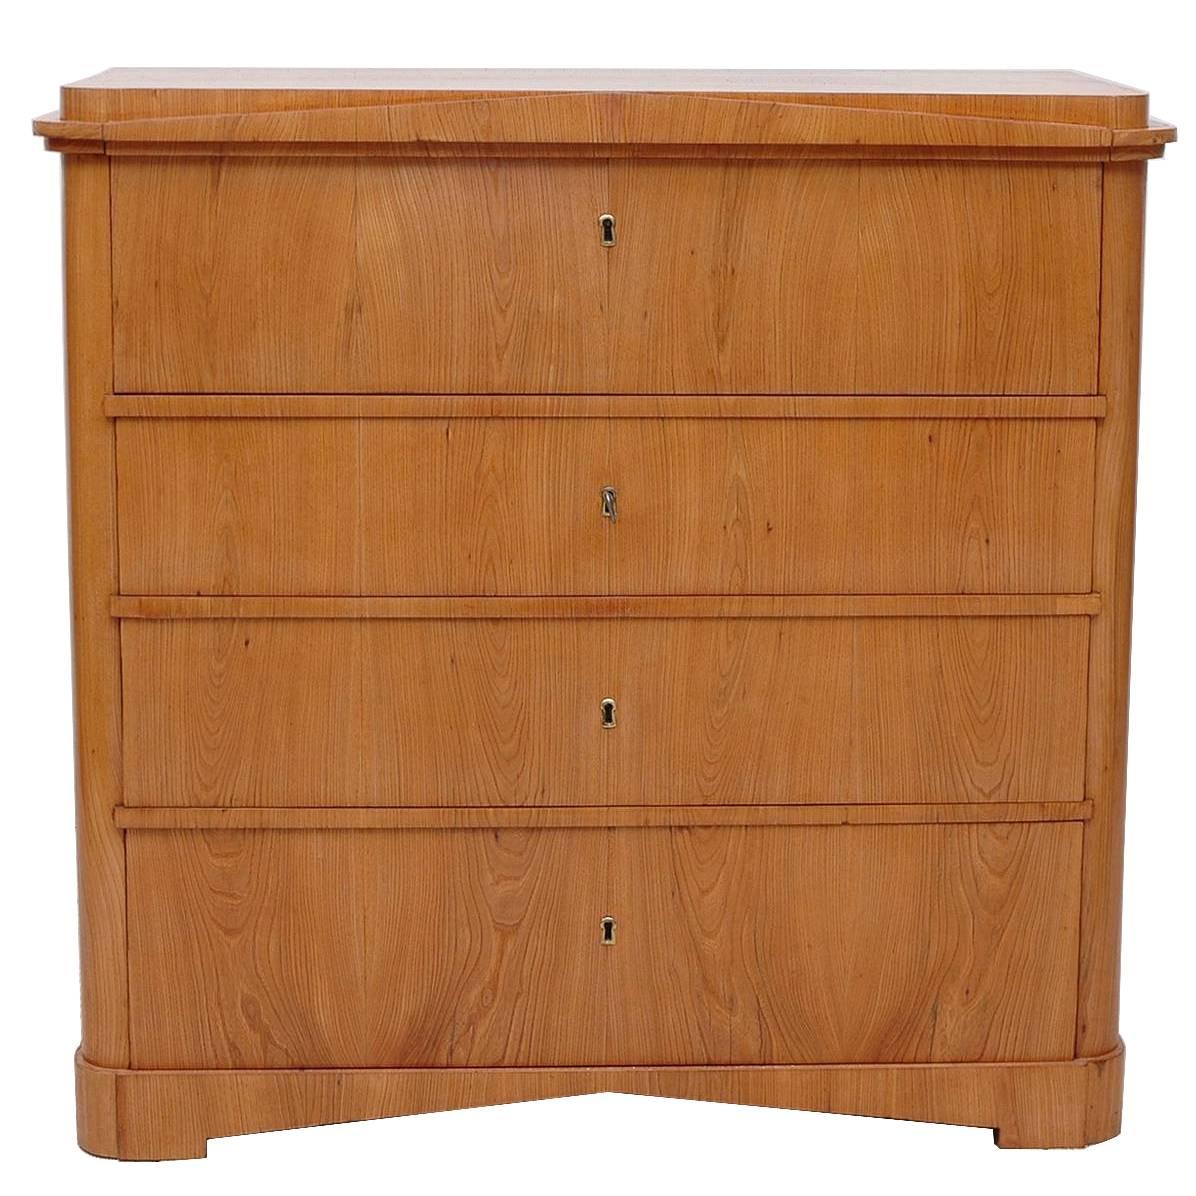 A handsome small North German Biedermeier chest of drawers with four drawers. Top drawer folds opens to a secretary desk housing an open cubby surrounded by eight small drawers. In beautiful bookmatched ashwood with pediment top and bracket feet,